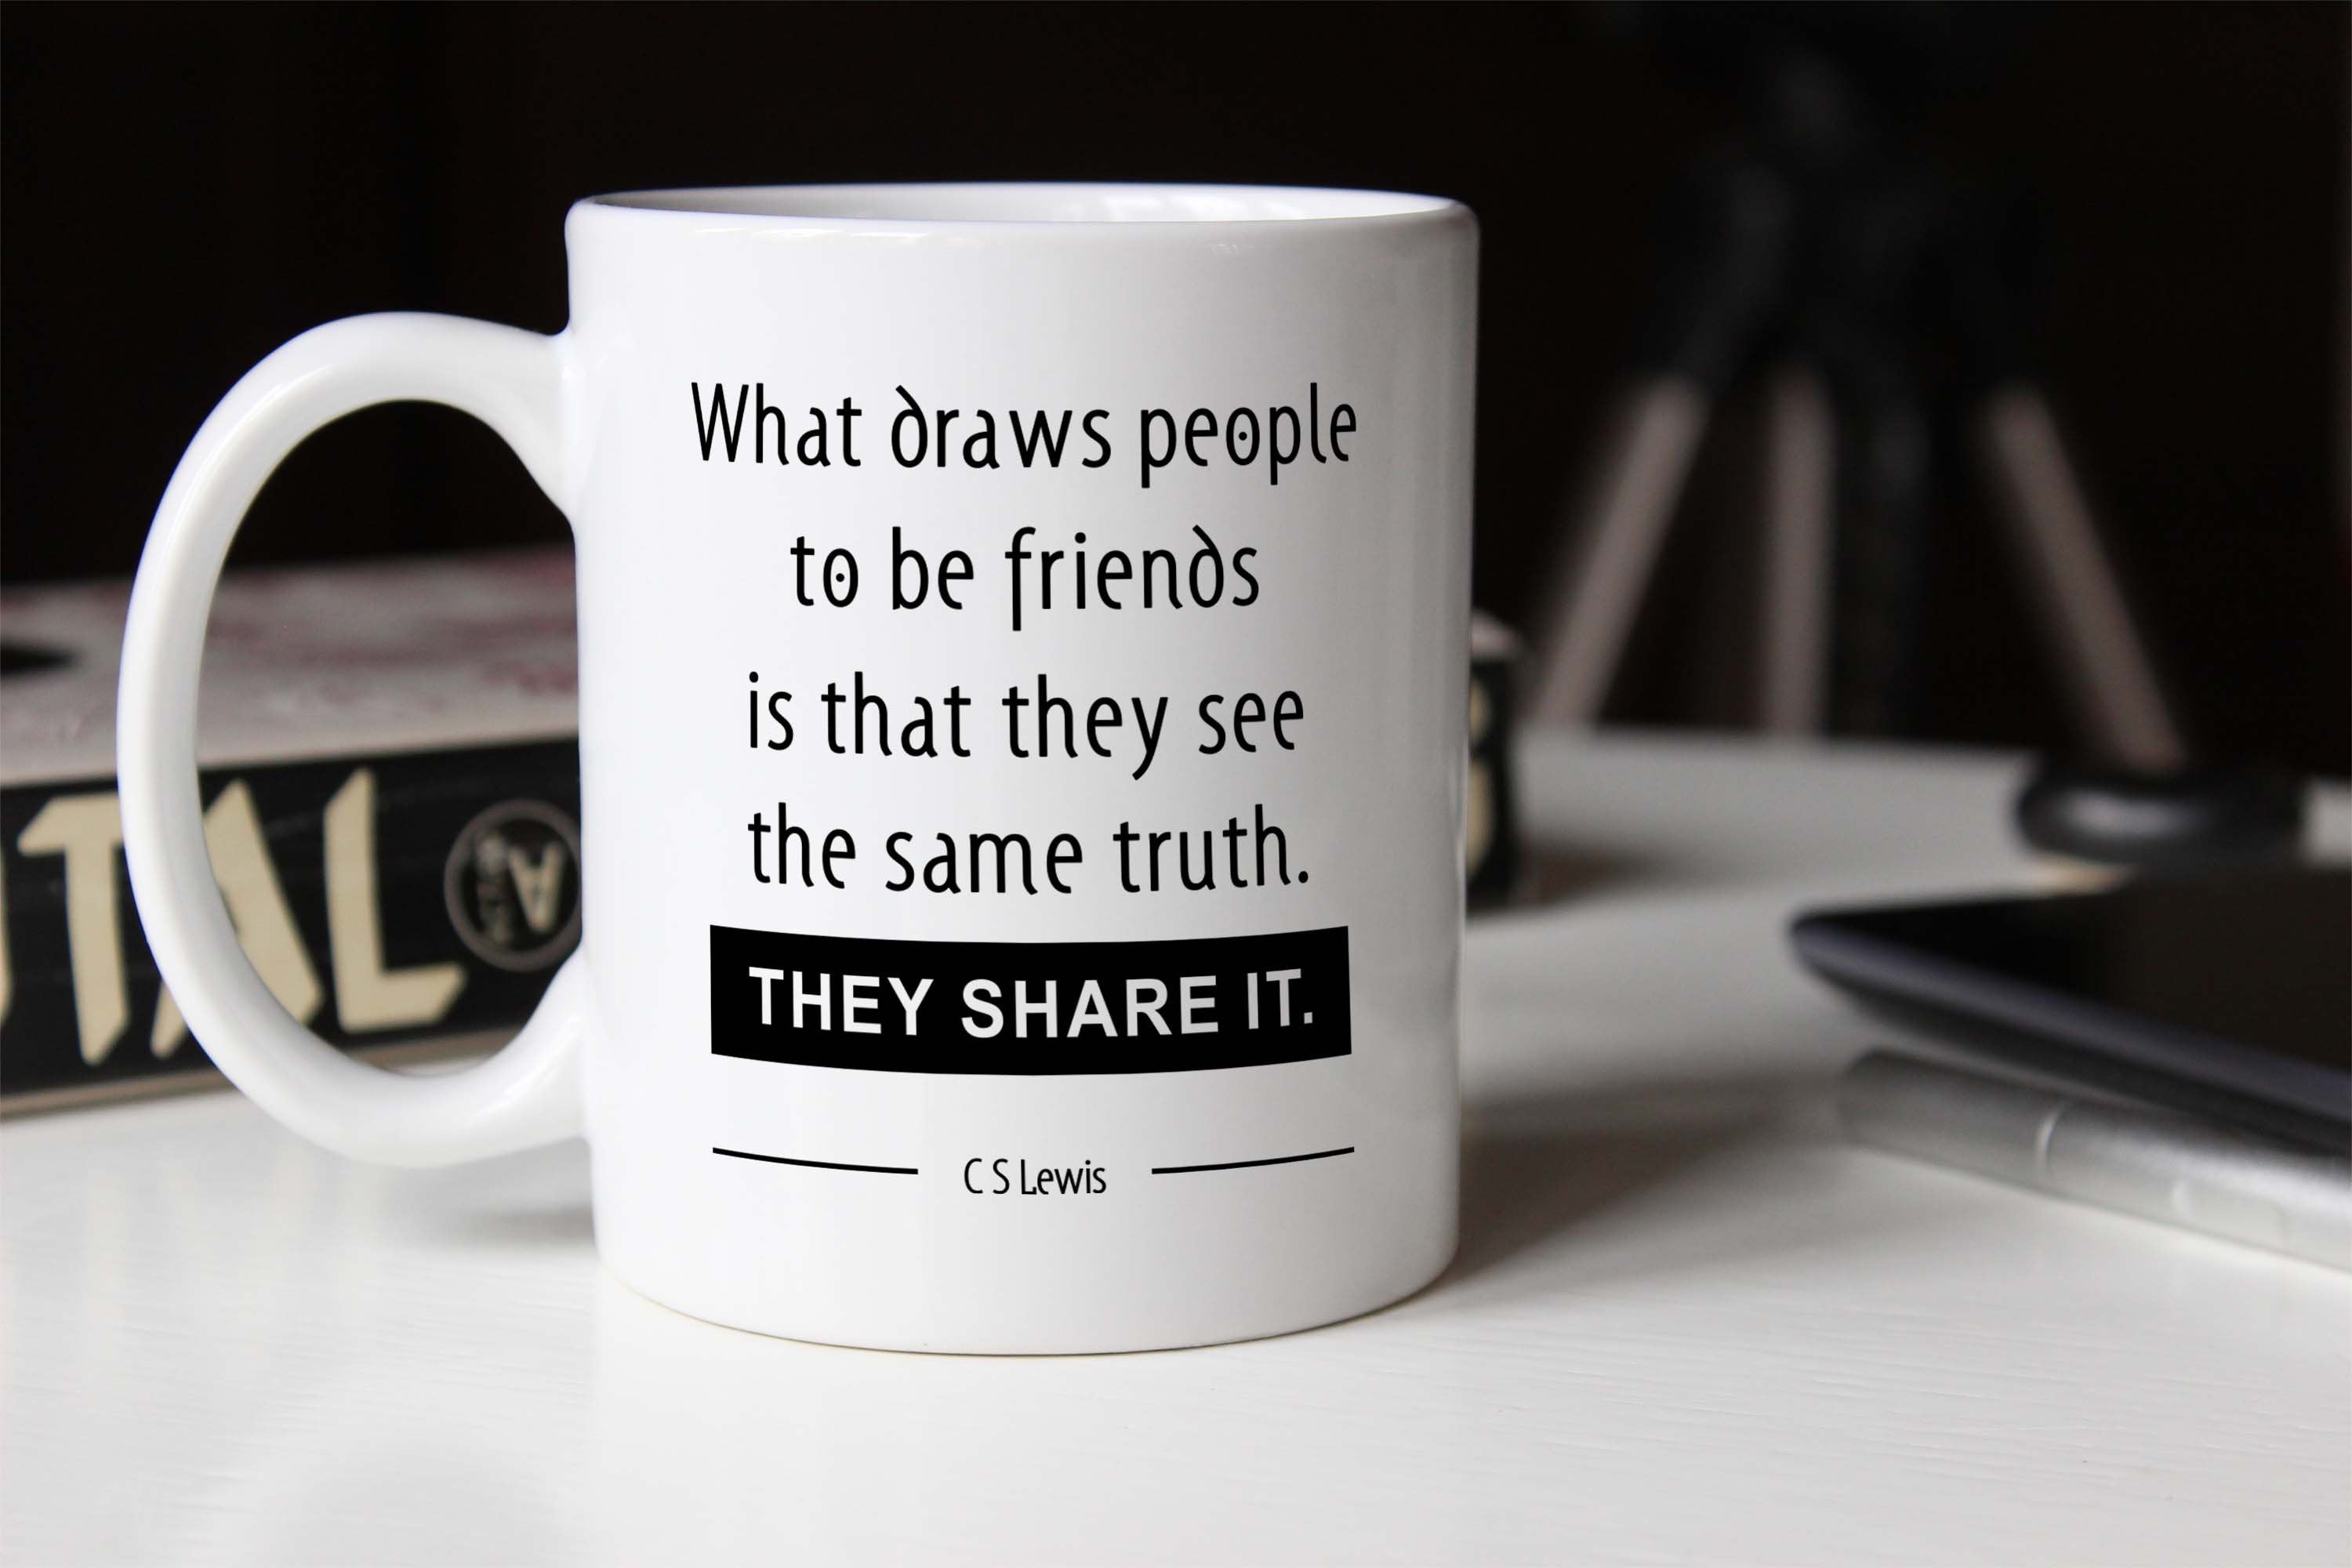 Friend Black Coffee Mug With C.S. Lewis Quote, What Draws People To Be Friends Is That They See The Same Truth